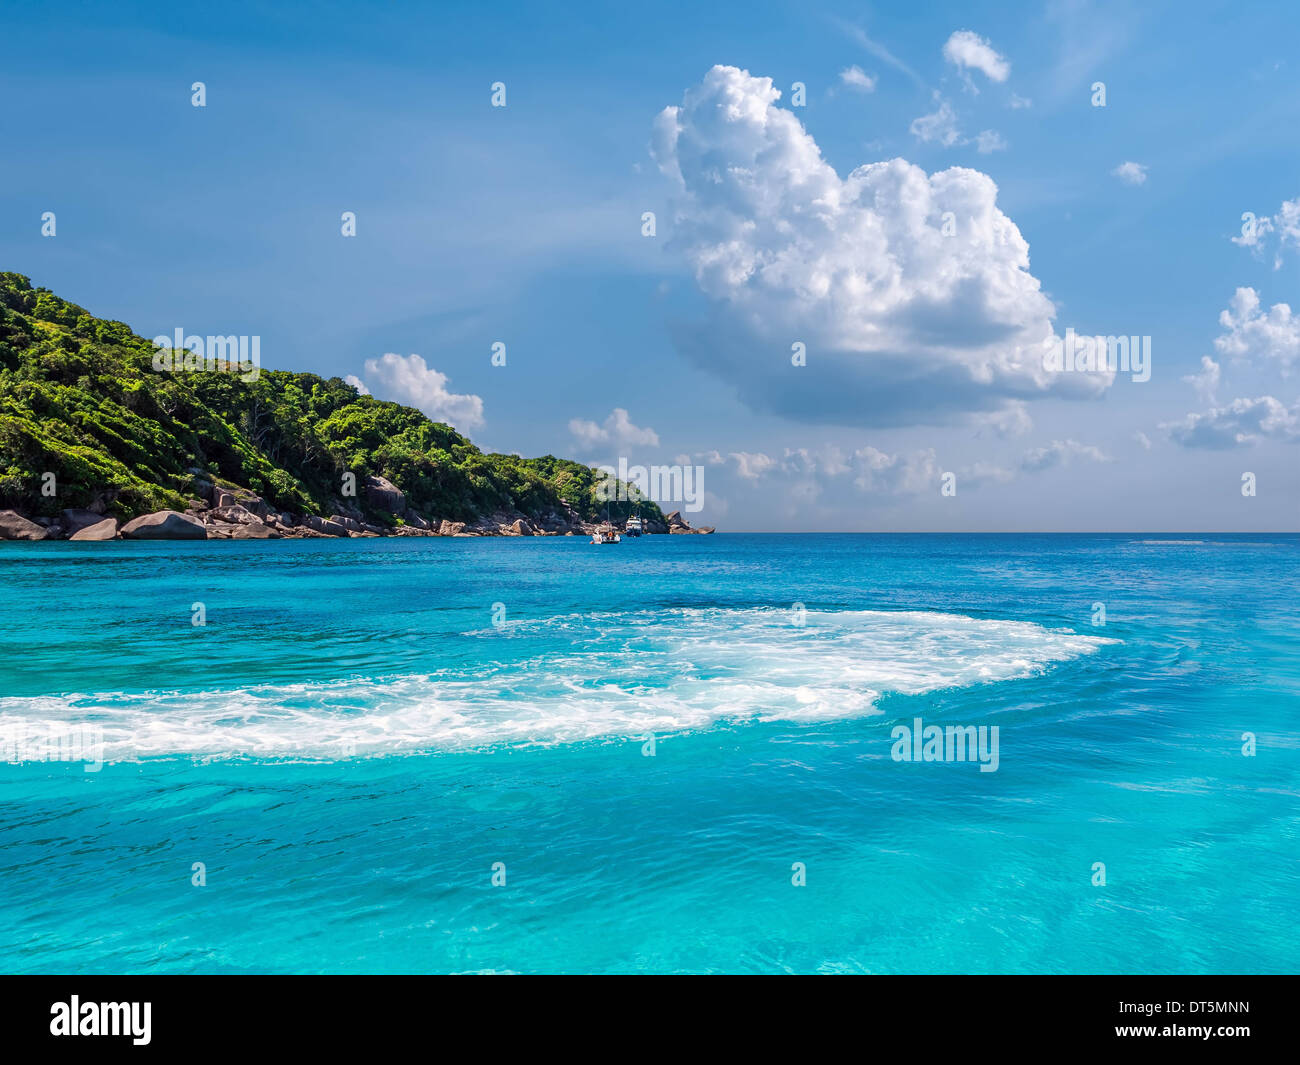 Turquoise waters of Andaman Sea Stock Photo